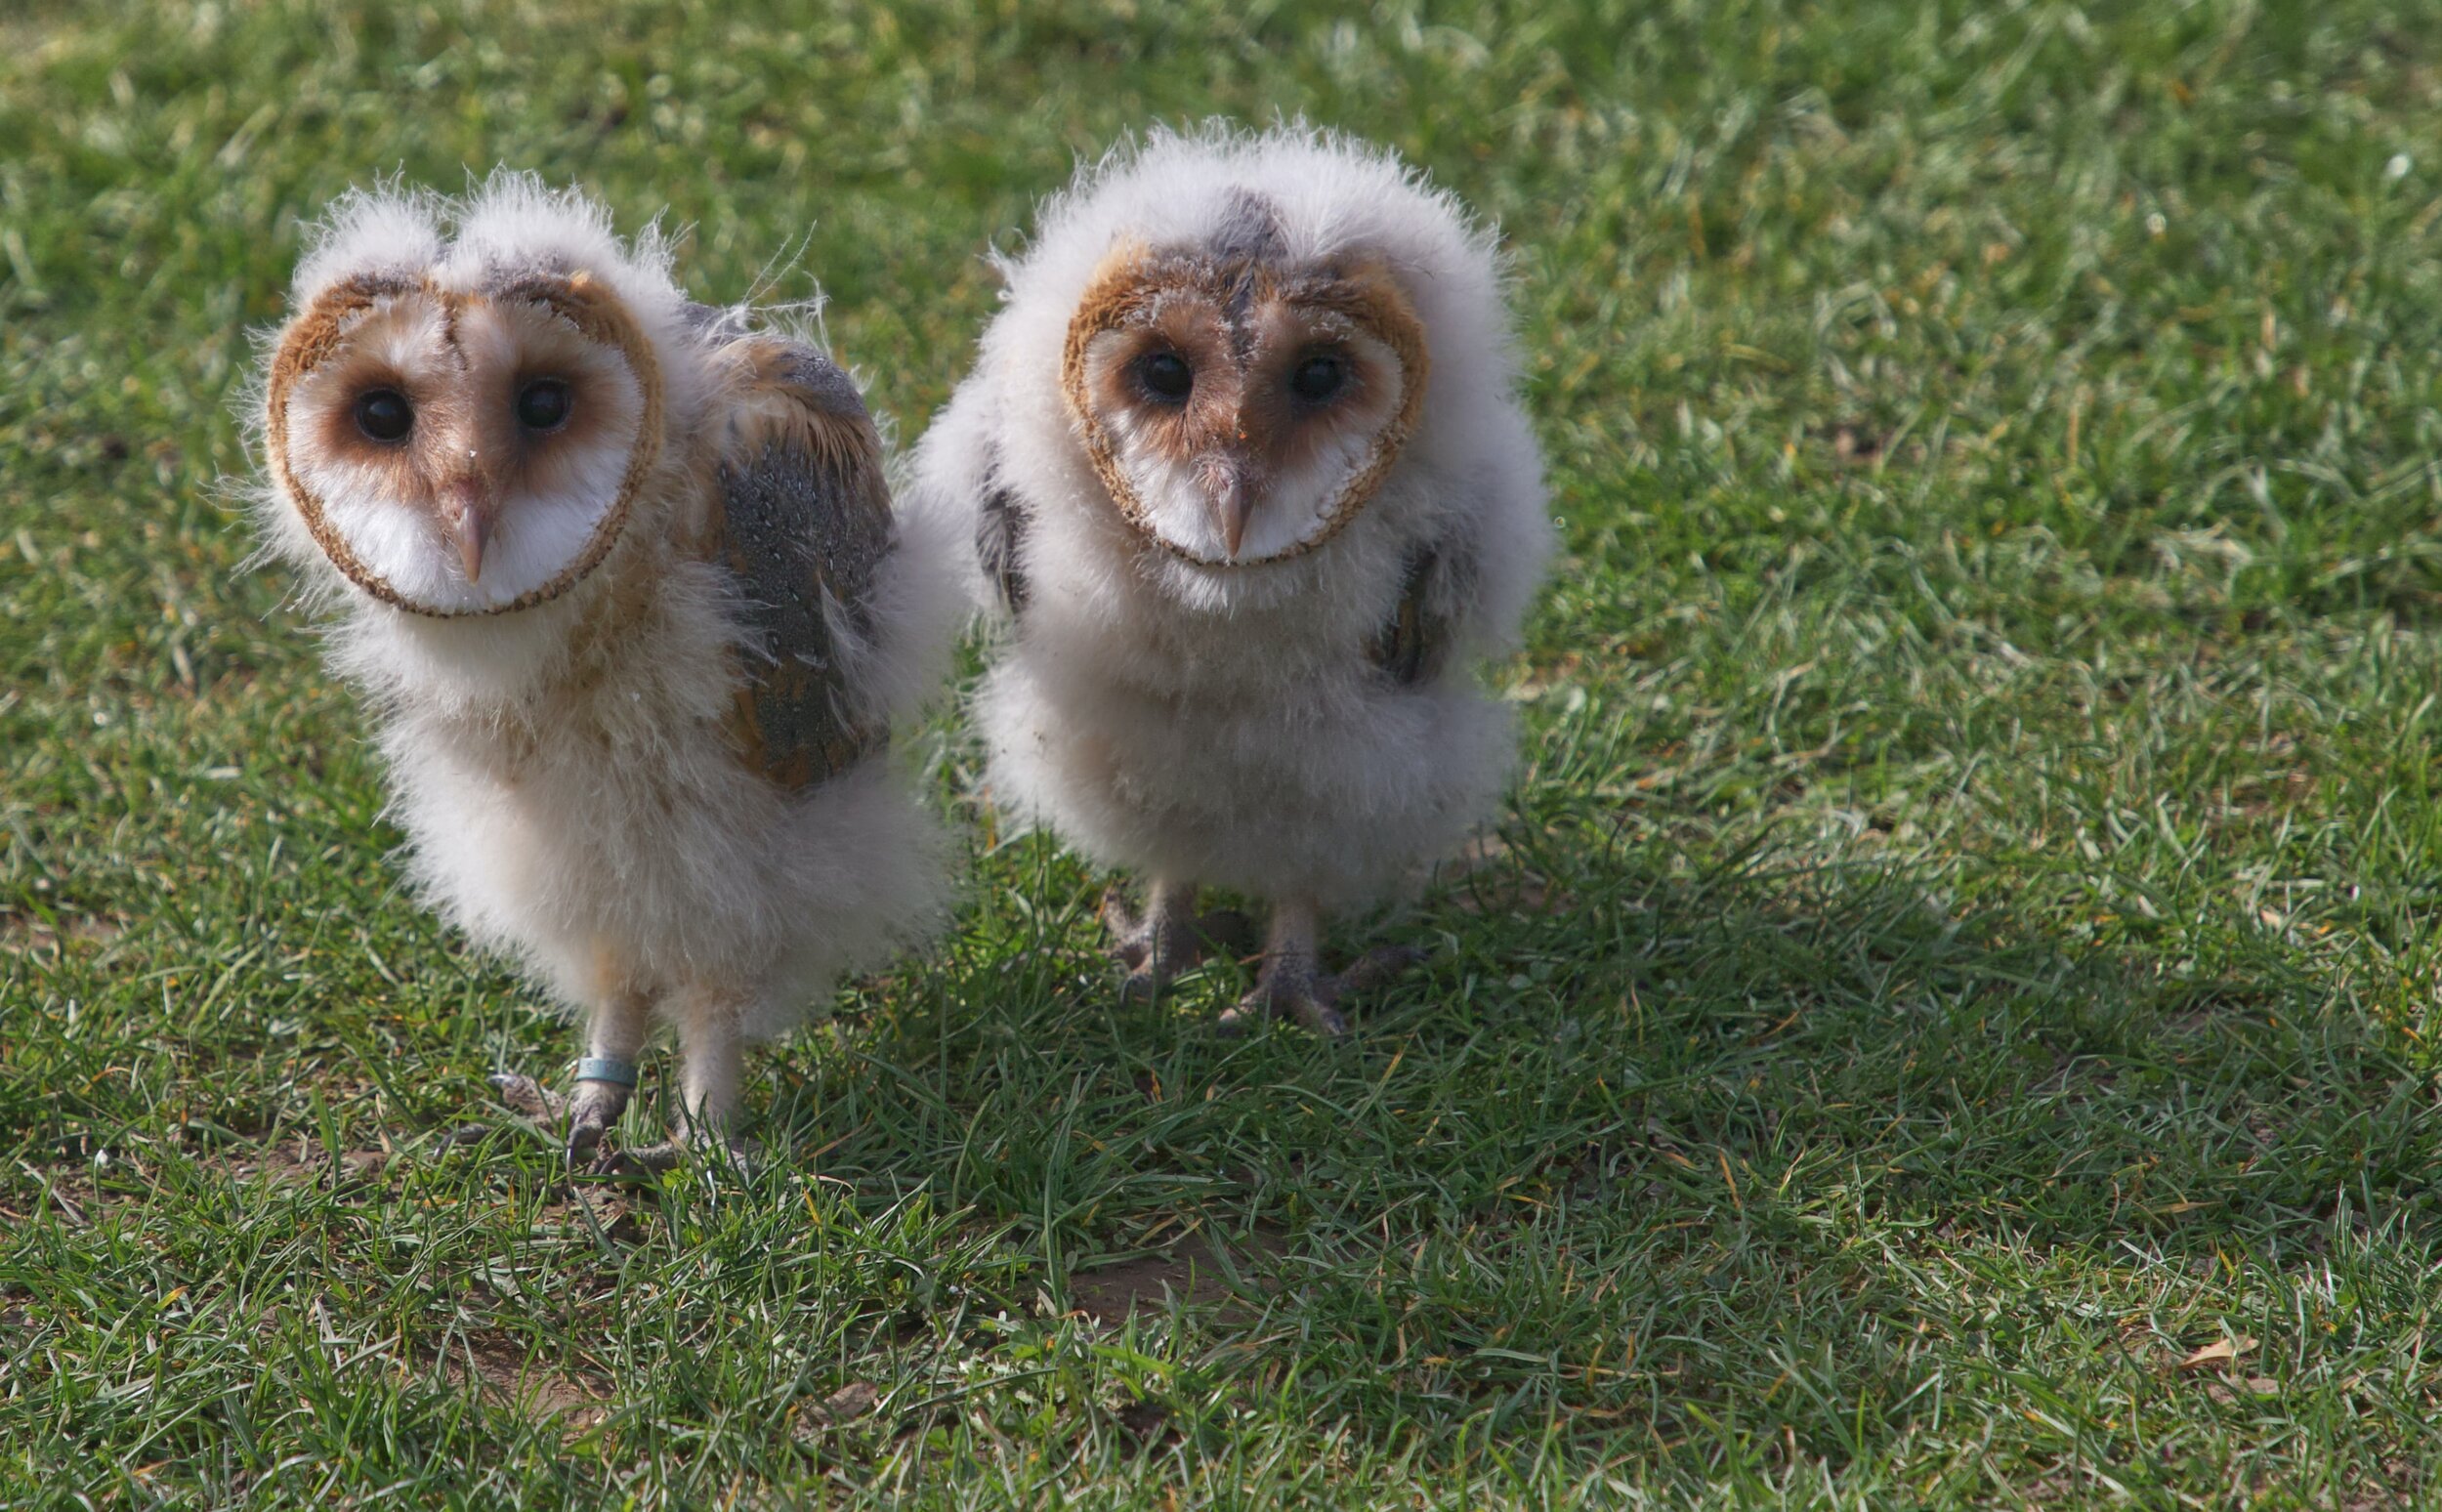 A baby owl is called an owlet.